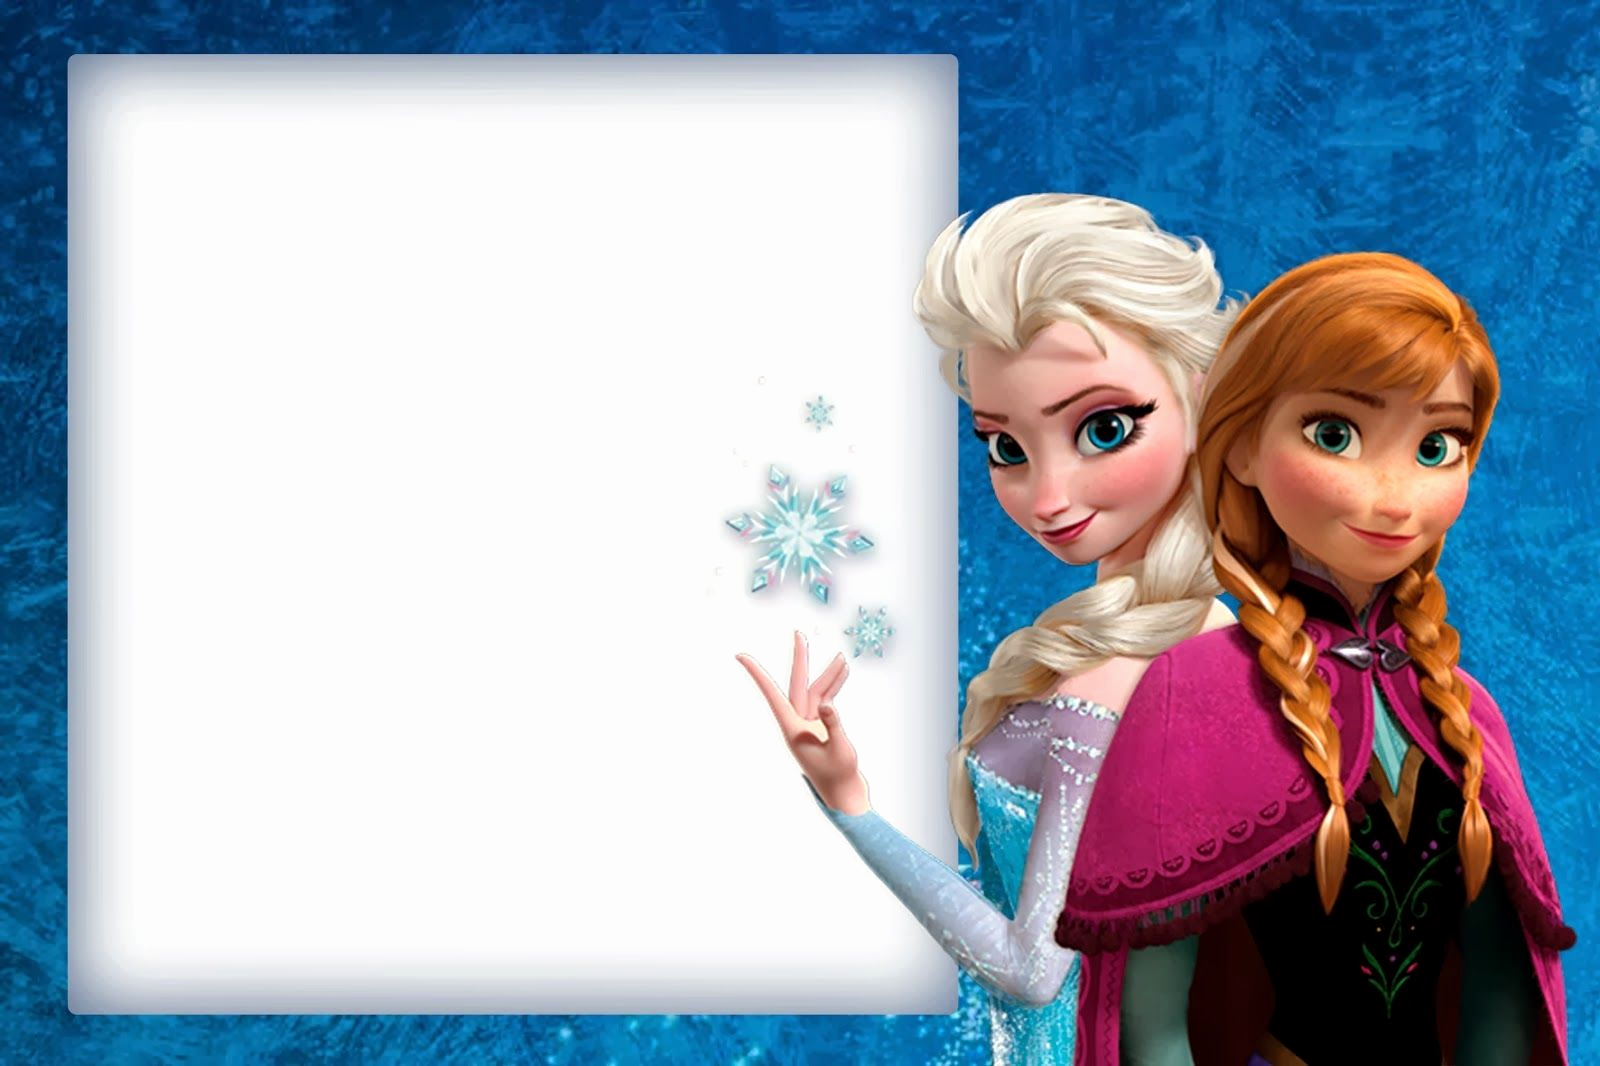 Free Frozen Invitation Template Awesome Frozen Cute Free Printable Invitations A Few Nice Ones